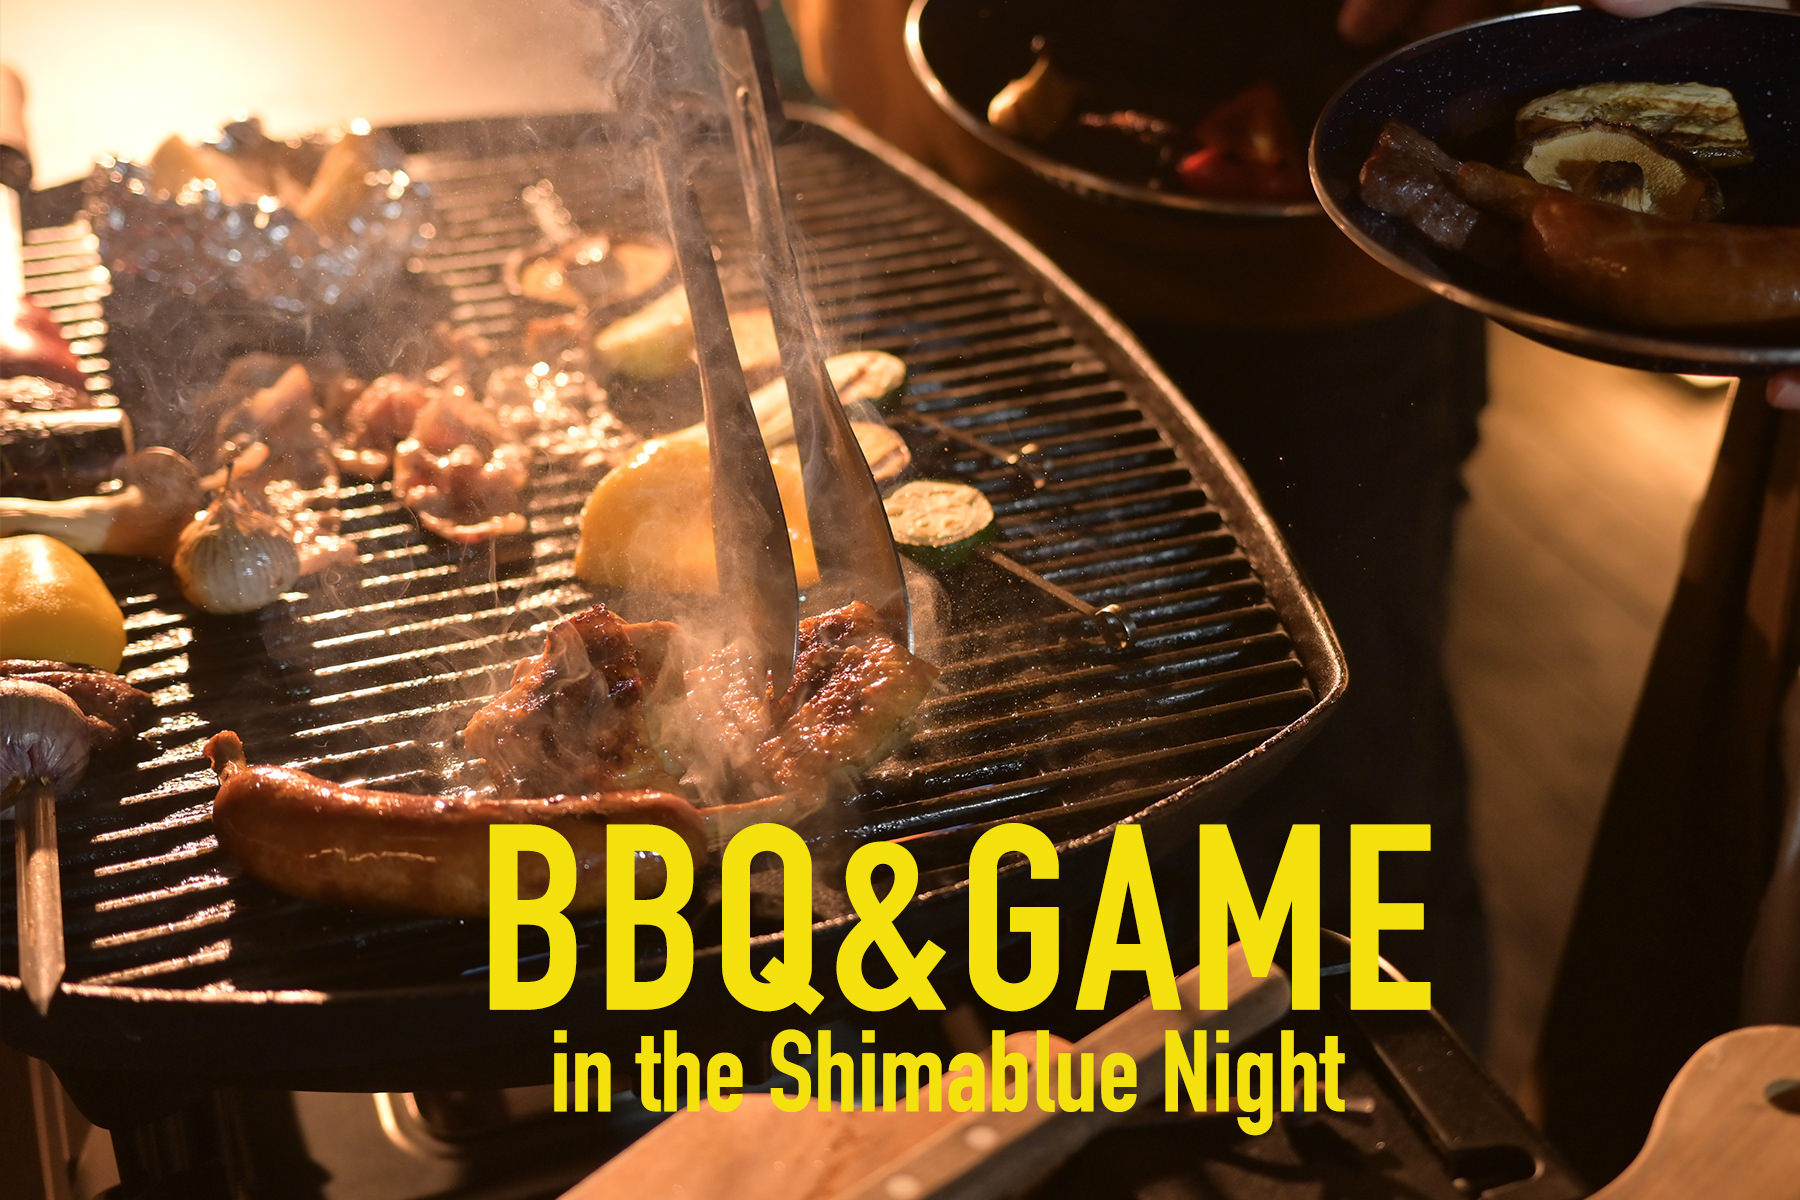 BBQ&GAME in the Shimablue Night